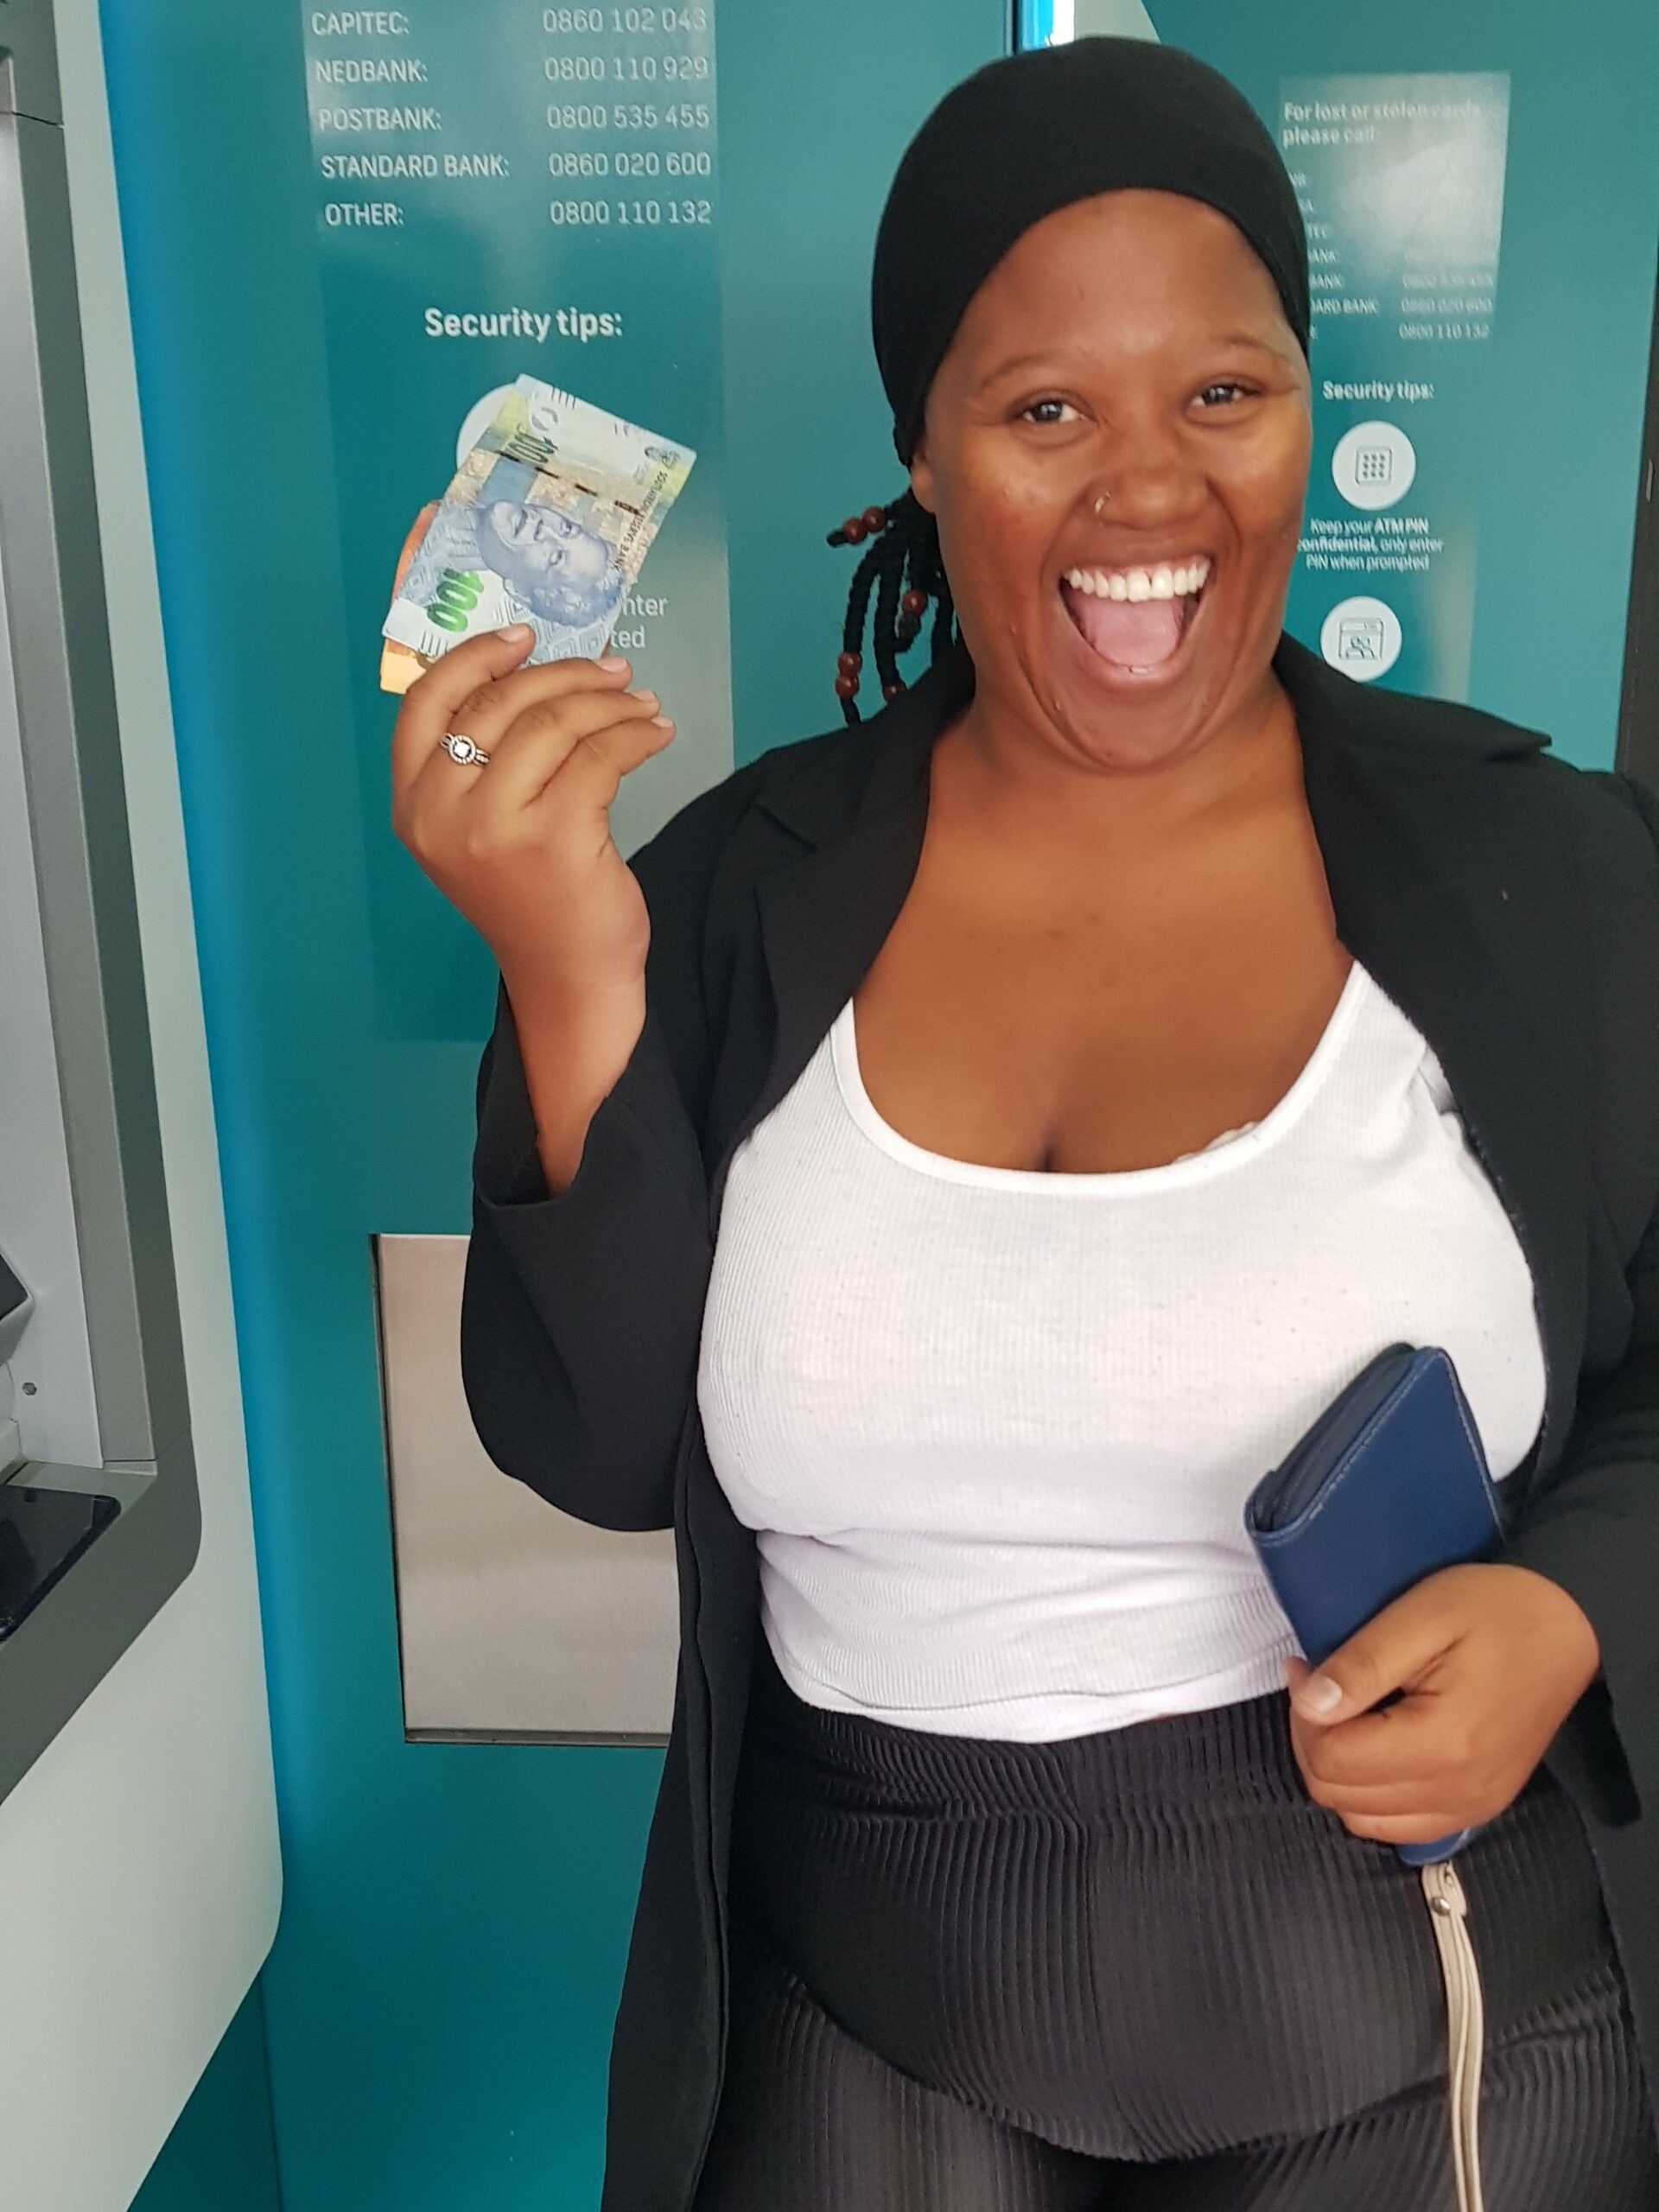 We achieved a major milestone when, for the first time, Chantelle successfully converted her crypto-based Basic Income into FIAT and withdrew ZAR from the ATM.